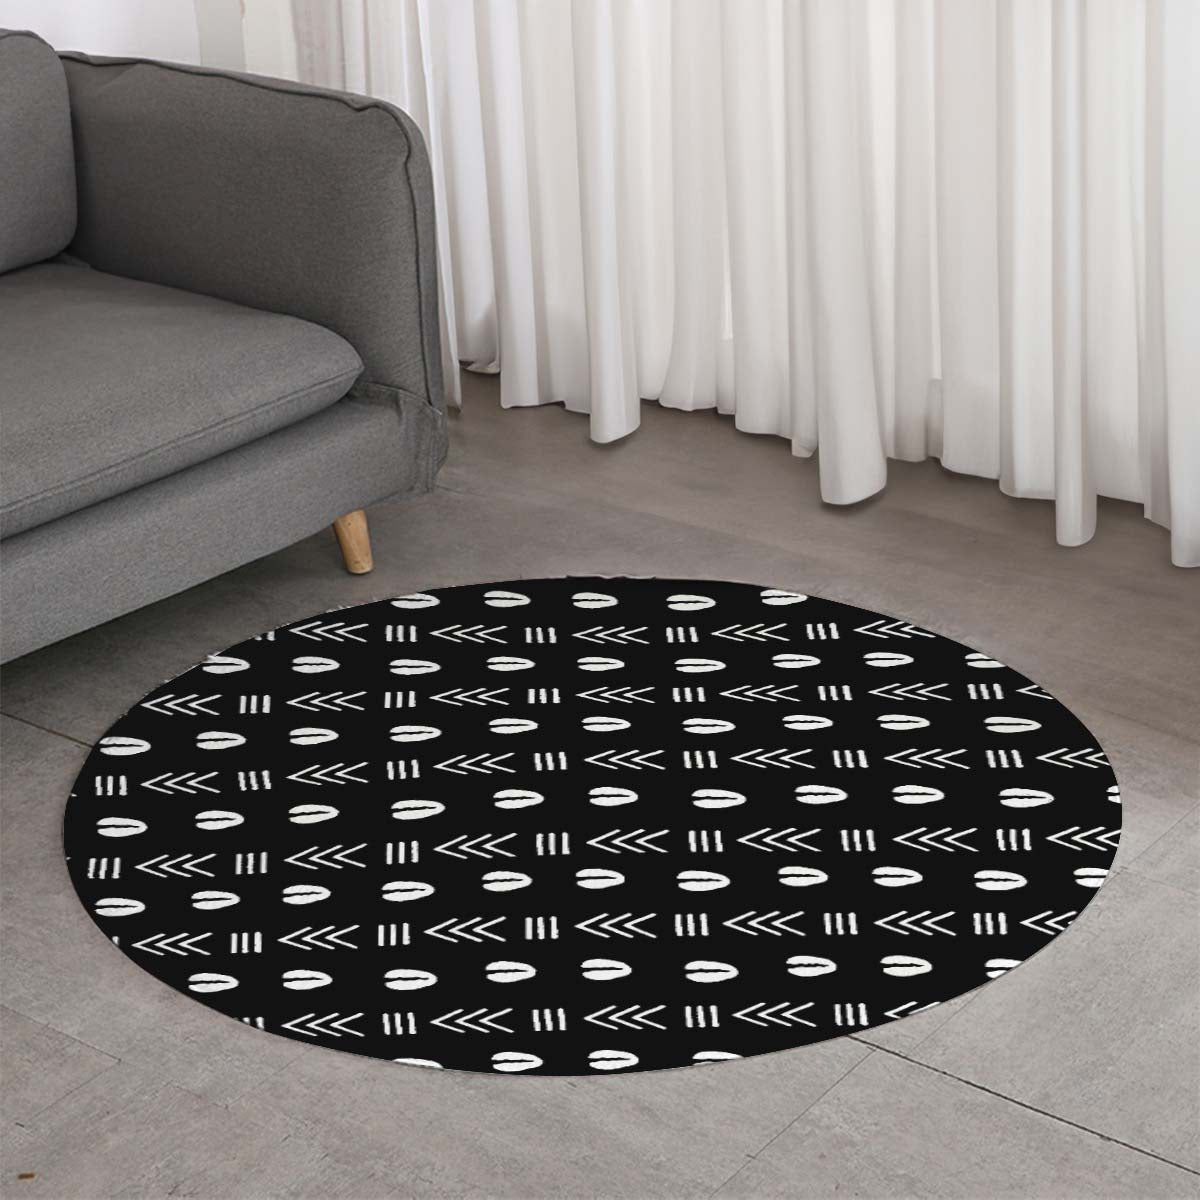 Cowrie African Round Rug Black & White Carpet - Bynelo